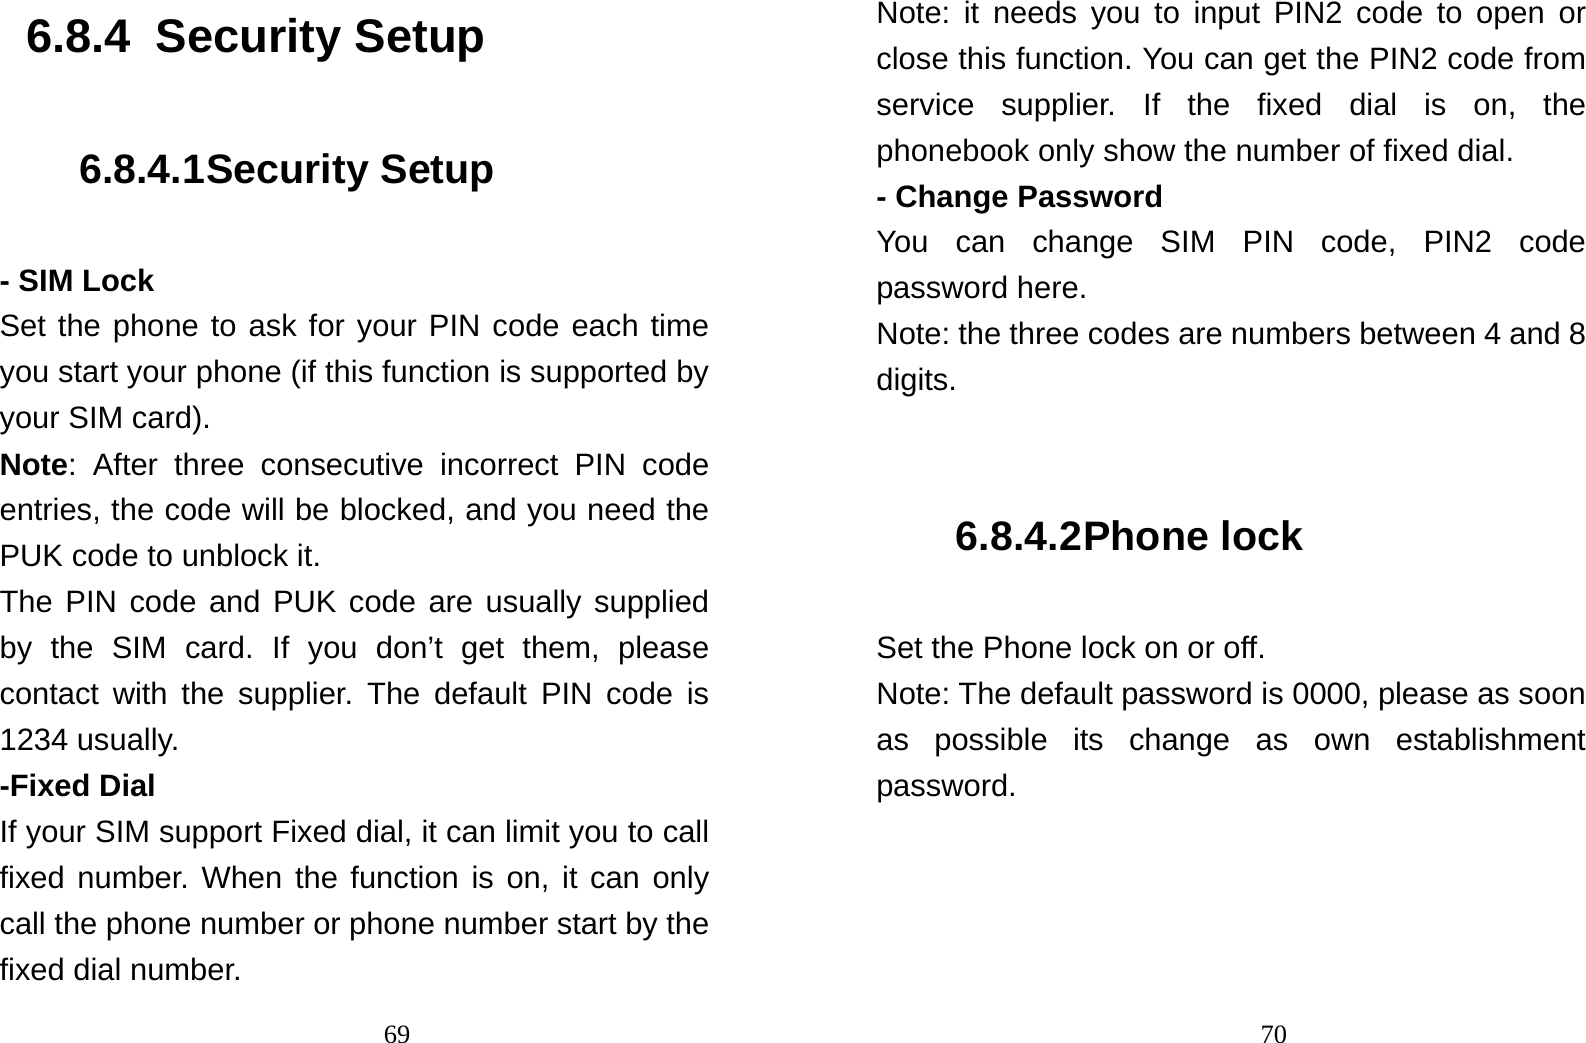                                696.8.4  Security Setup 6.8.4.1 Security Setup - SIM Lock Set the phone to ask for your PIN code each time you start your phone (if this function is supported by your SIM card). Note: After three consecutive incorrect PIN code entries, the code will be blocked, and you need the PUK code to unblock it. The PIN code and PUK code are usually supplied by the SIM card. If you don’t get them, please contact with the supplier. The default PIN code is 1234 usually.   -Fixed Dial If your SIM support Fixed dial, it can limit you to call fixed number. When the function is on, it can only call the phone number or phone number start by the fixed dial number.                                70Note: it needs you to input PIN2 code to open or close this function. You can get the PIN2 code from service supplier. If the fixed dial is on, the phonebook only show the number of fixed dial.   - Change Password You can change SIM PIN code, PIN2 code password here. Note: the three codes are numbers between 4 and 8 digits.  6.8.4.2 Phone lock Set the Phone lock on or off. Note: The default password is 0000, please as soon as possible its change as own establishment password. 